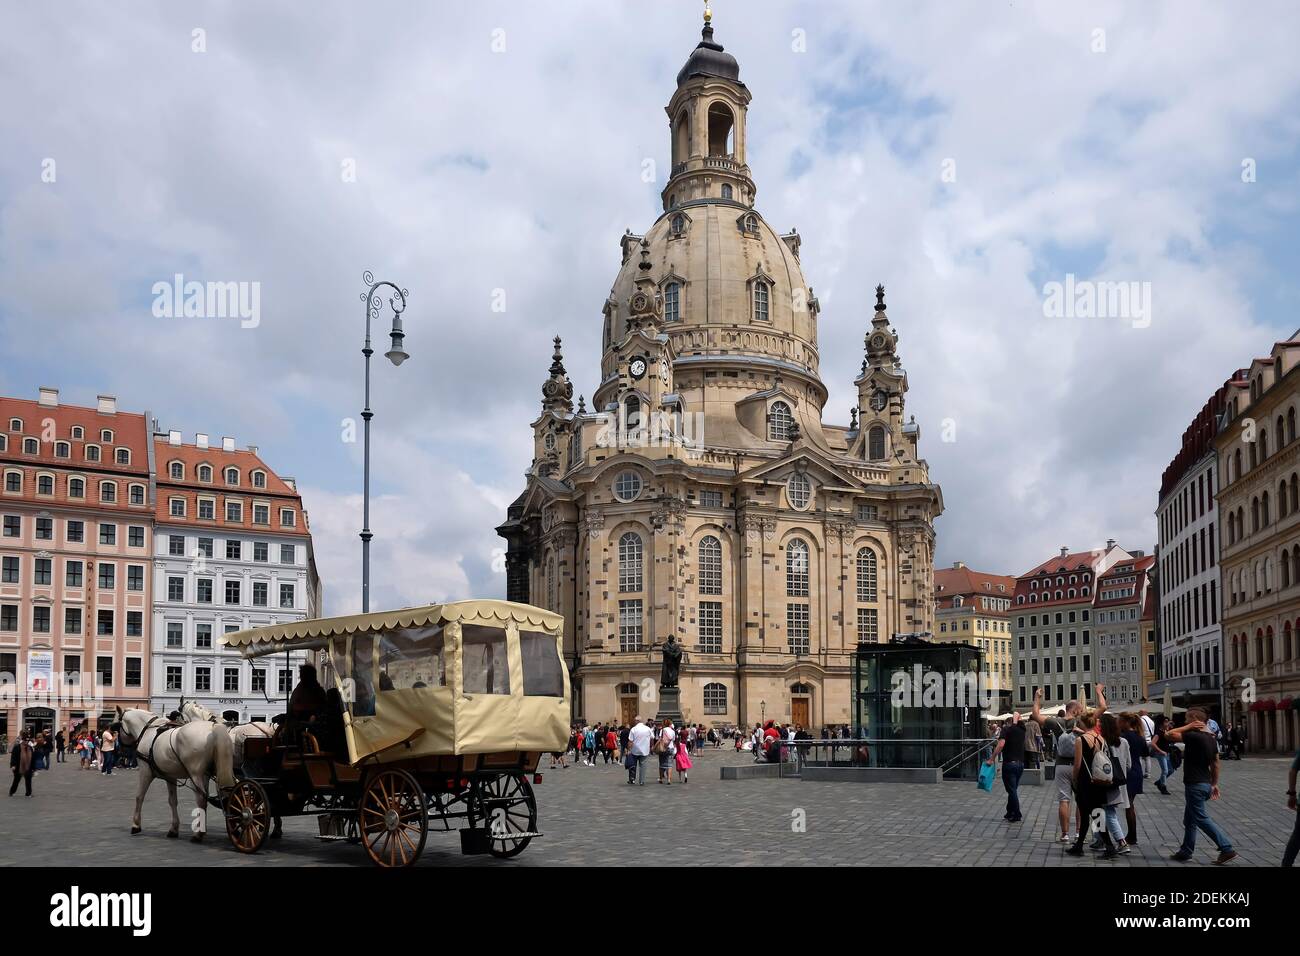 The Dresdner Frauenkirche ('Church of Our Lady') is a Lutheran church in Dresden, Germany. Stock Photo